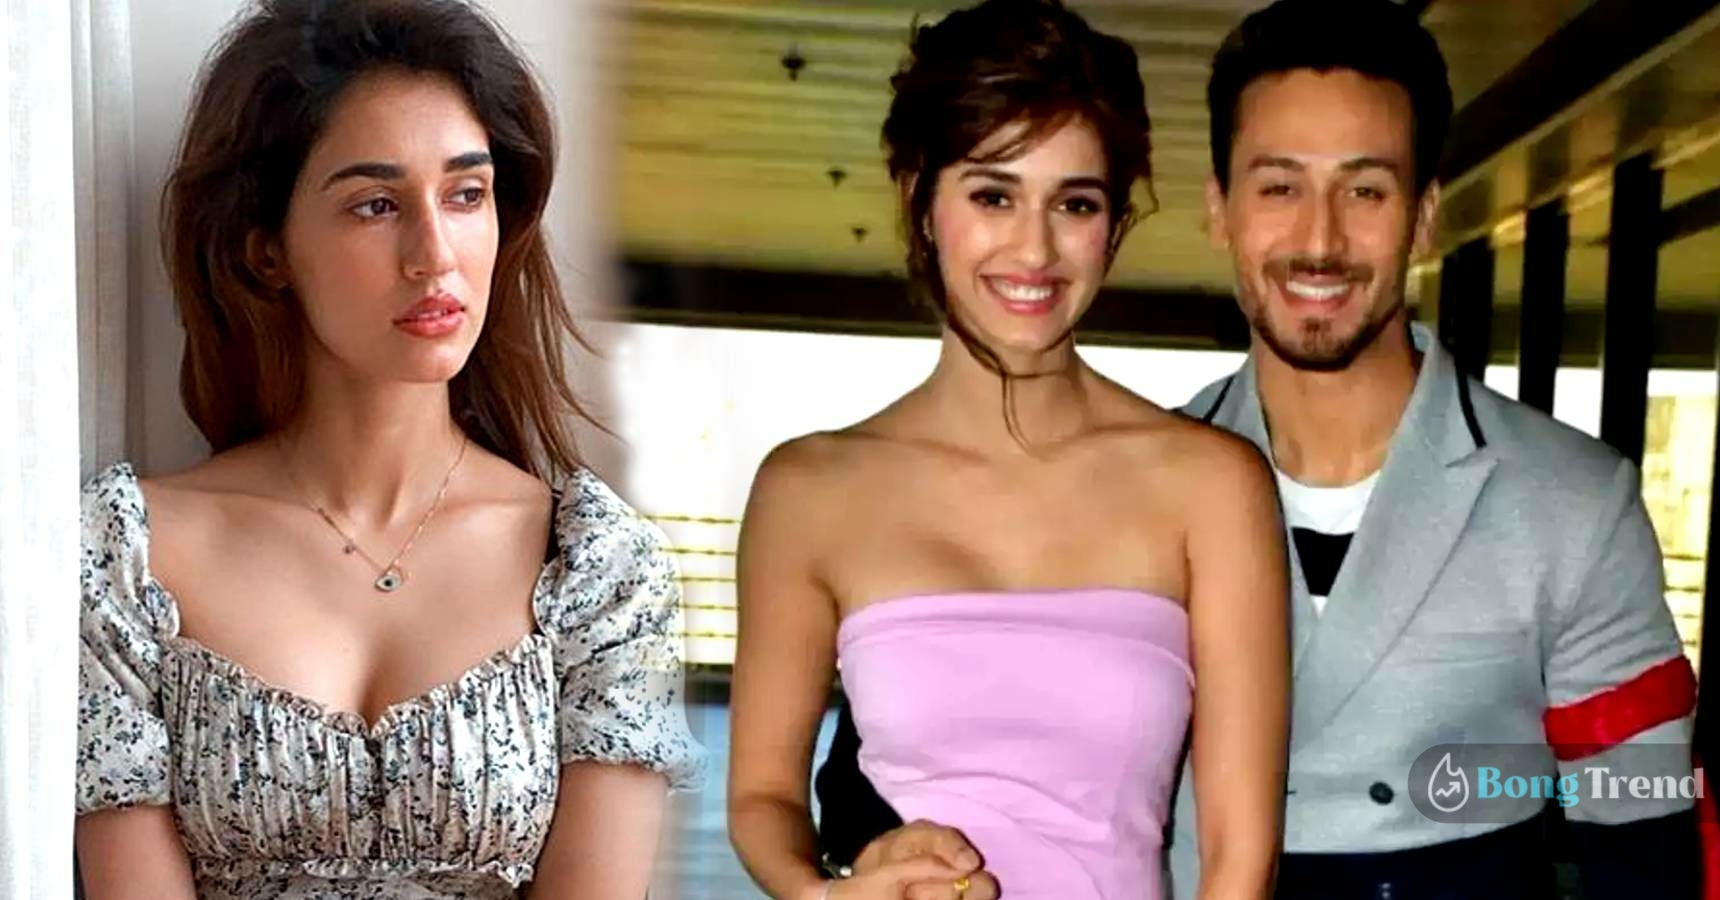 Disha Patani commented on Tiger Shroff’s video amid break up rumours